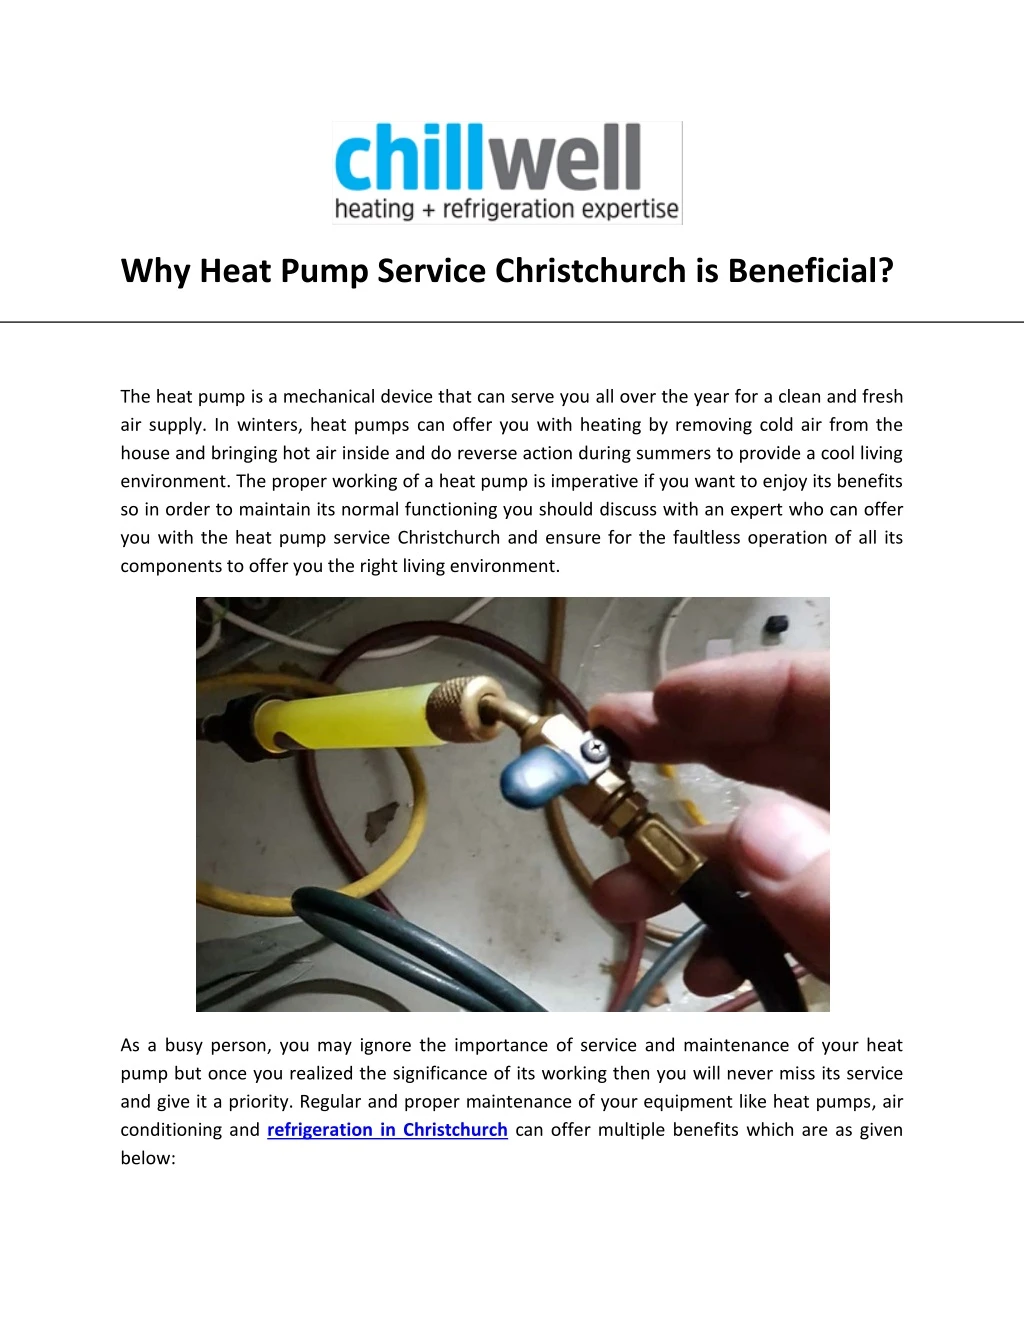 why heat pump service christchurch is beneficial